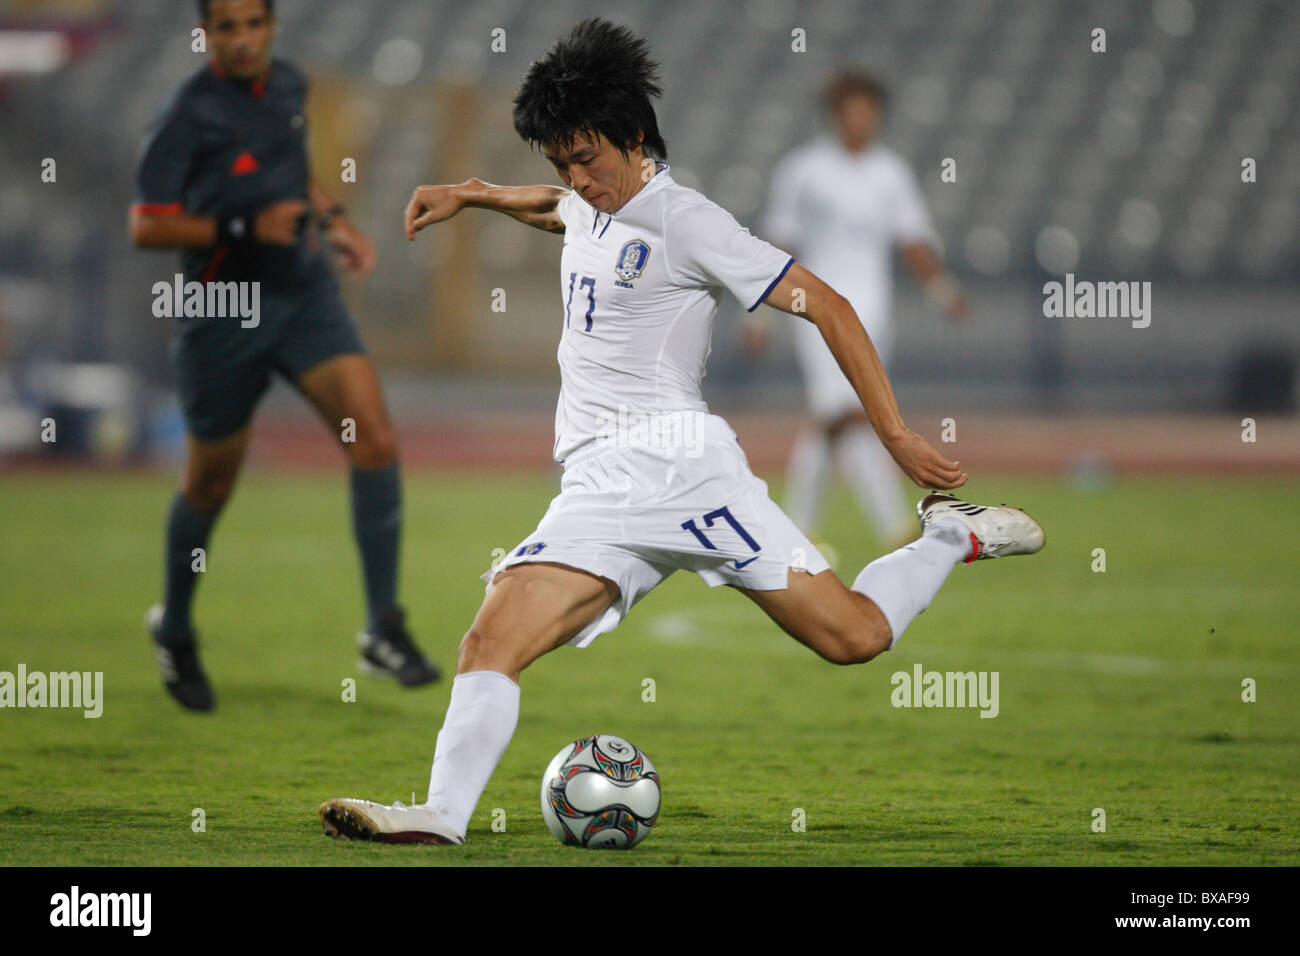 Suk Young Yun of South Korea sets to kick the ball during a 2009 FIFA U-20 World Cup round of 16 match against Paraguay. Stock Photo